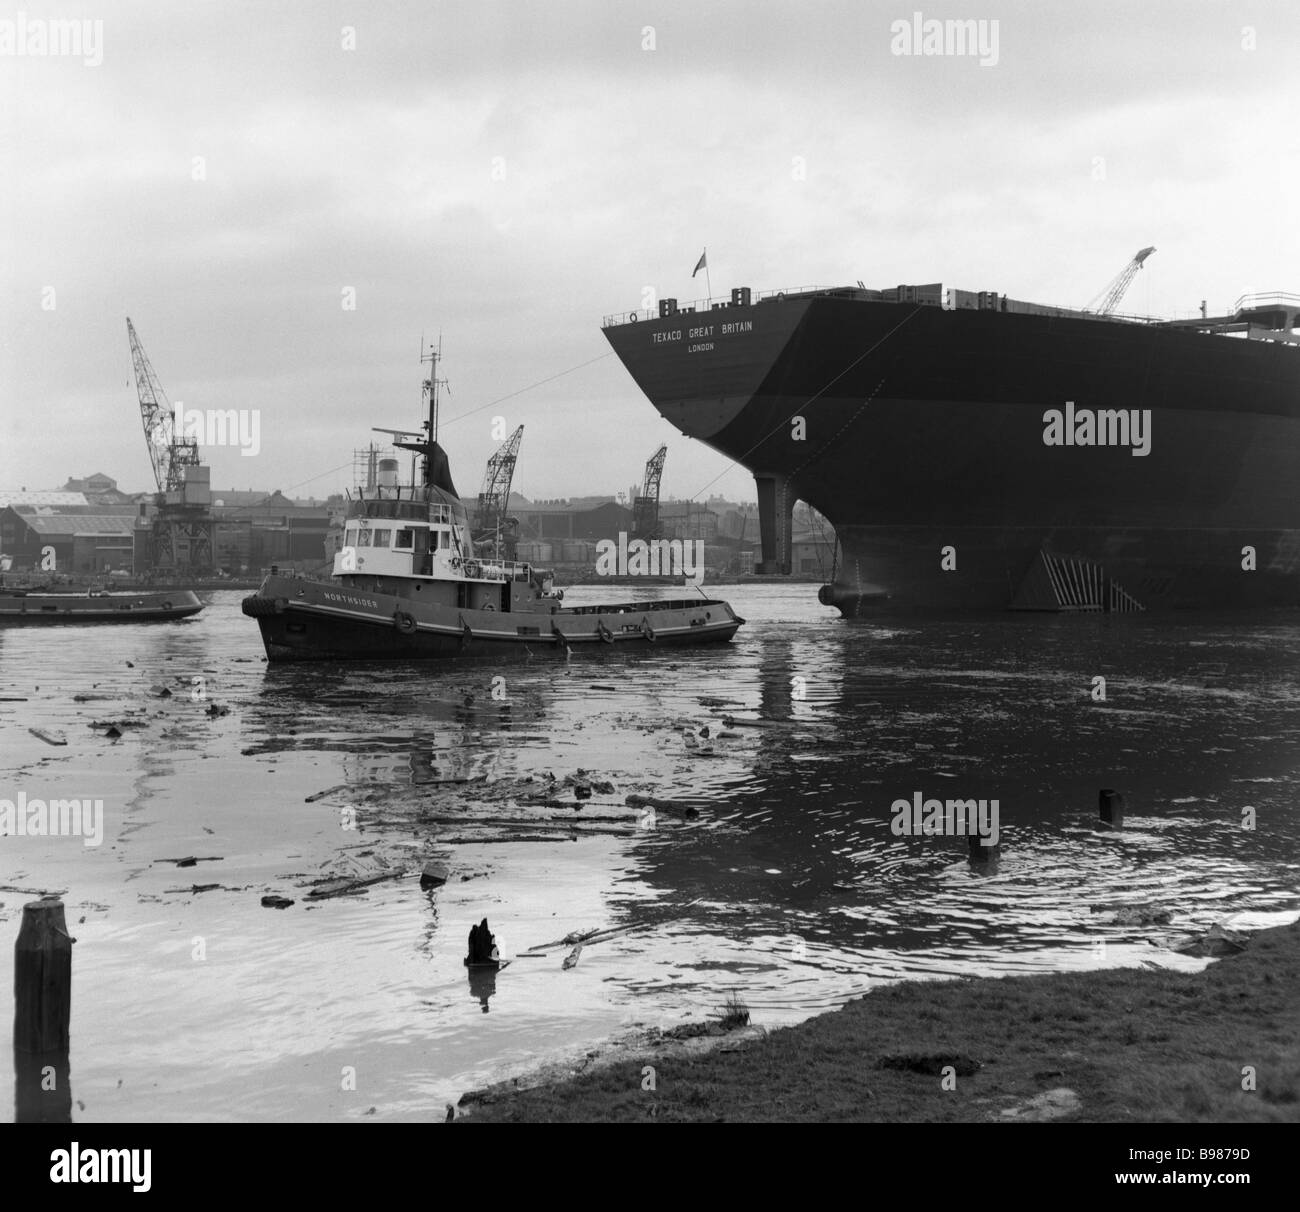 VLCC Texaco Great Britain immediately after launch in March 1971 north east England UK Stock Photo